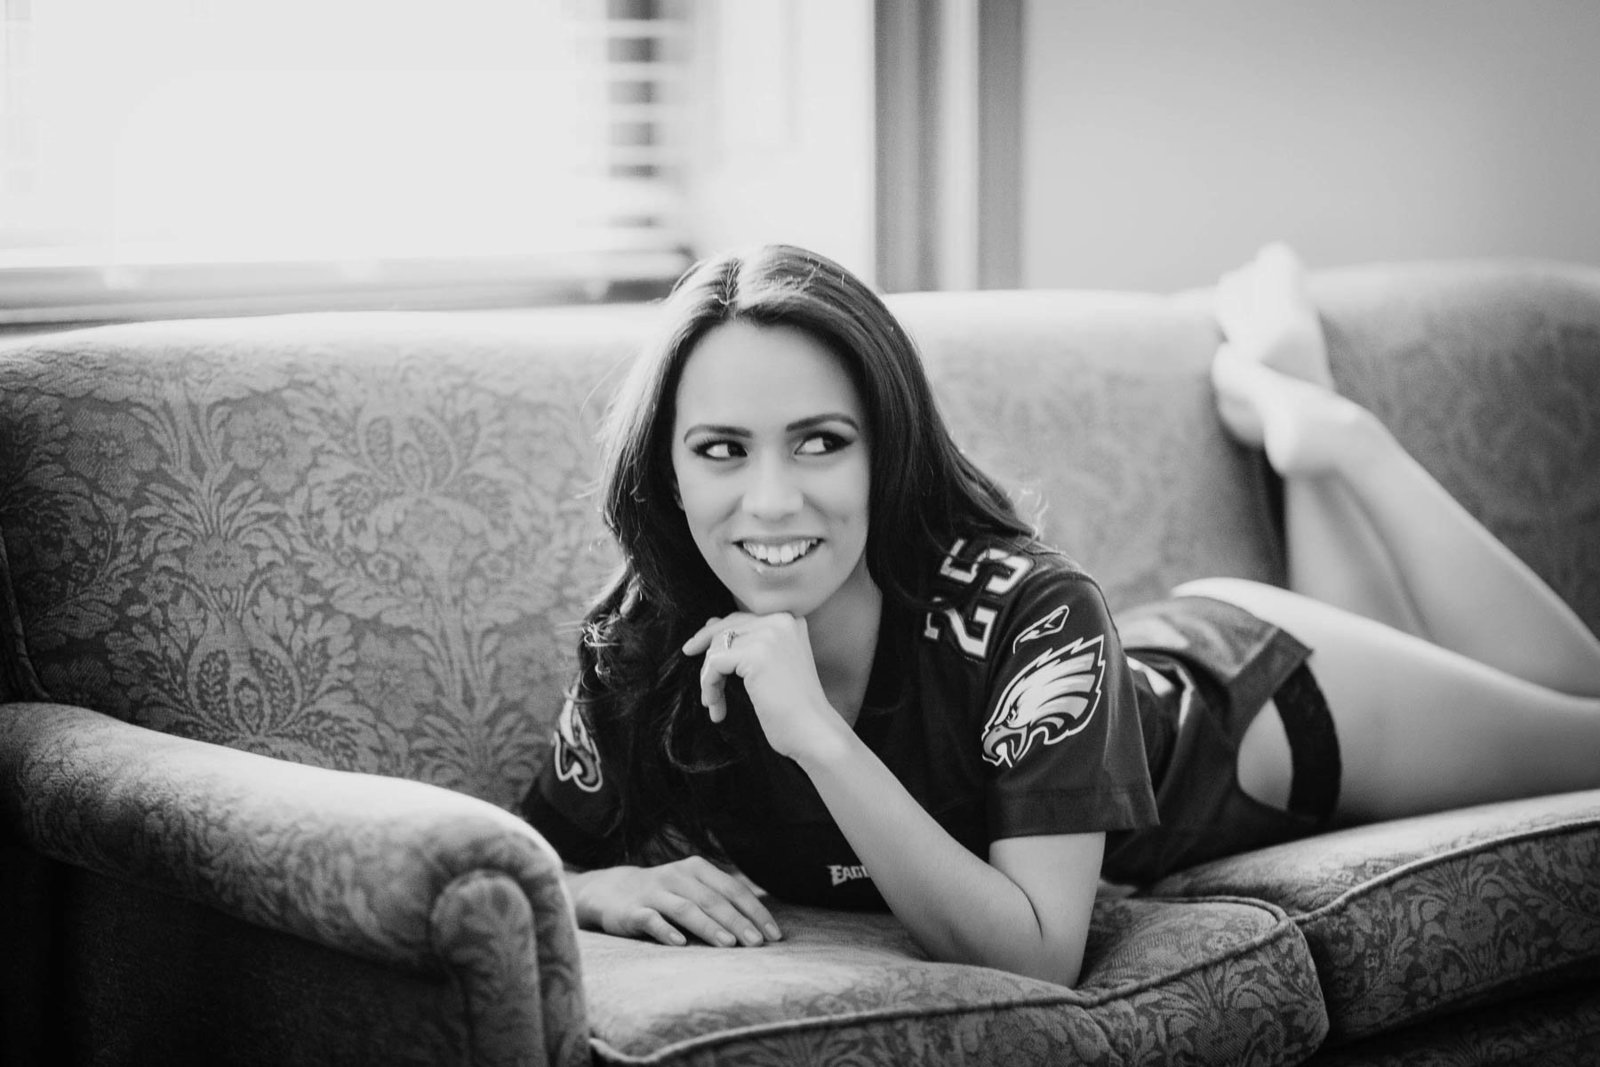 Ms C wears an Eagles jersey while laying on sofa, Boudoir Photography, Charleston, SC